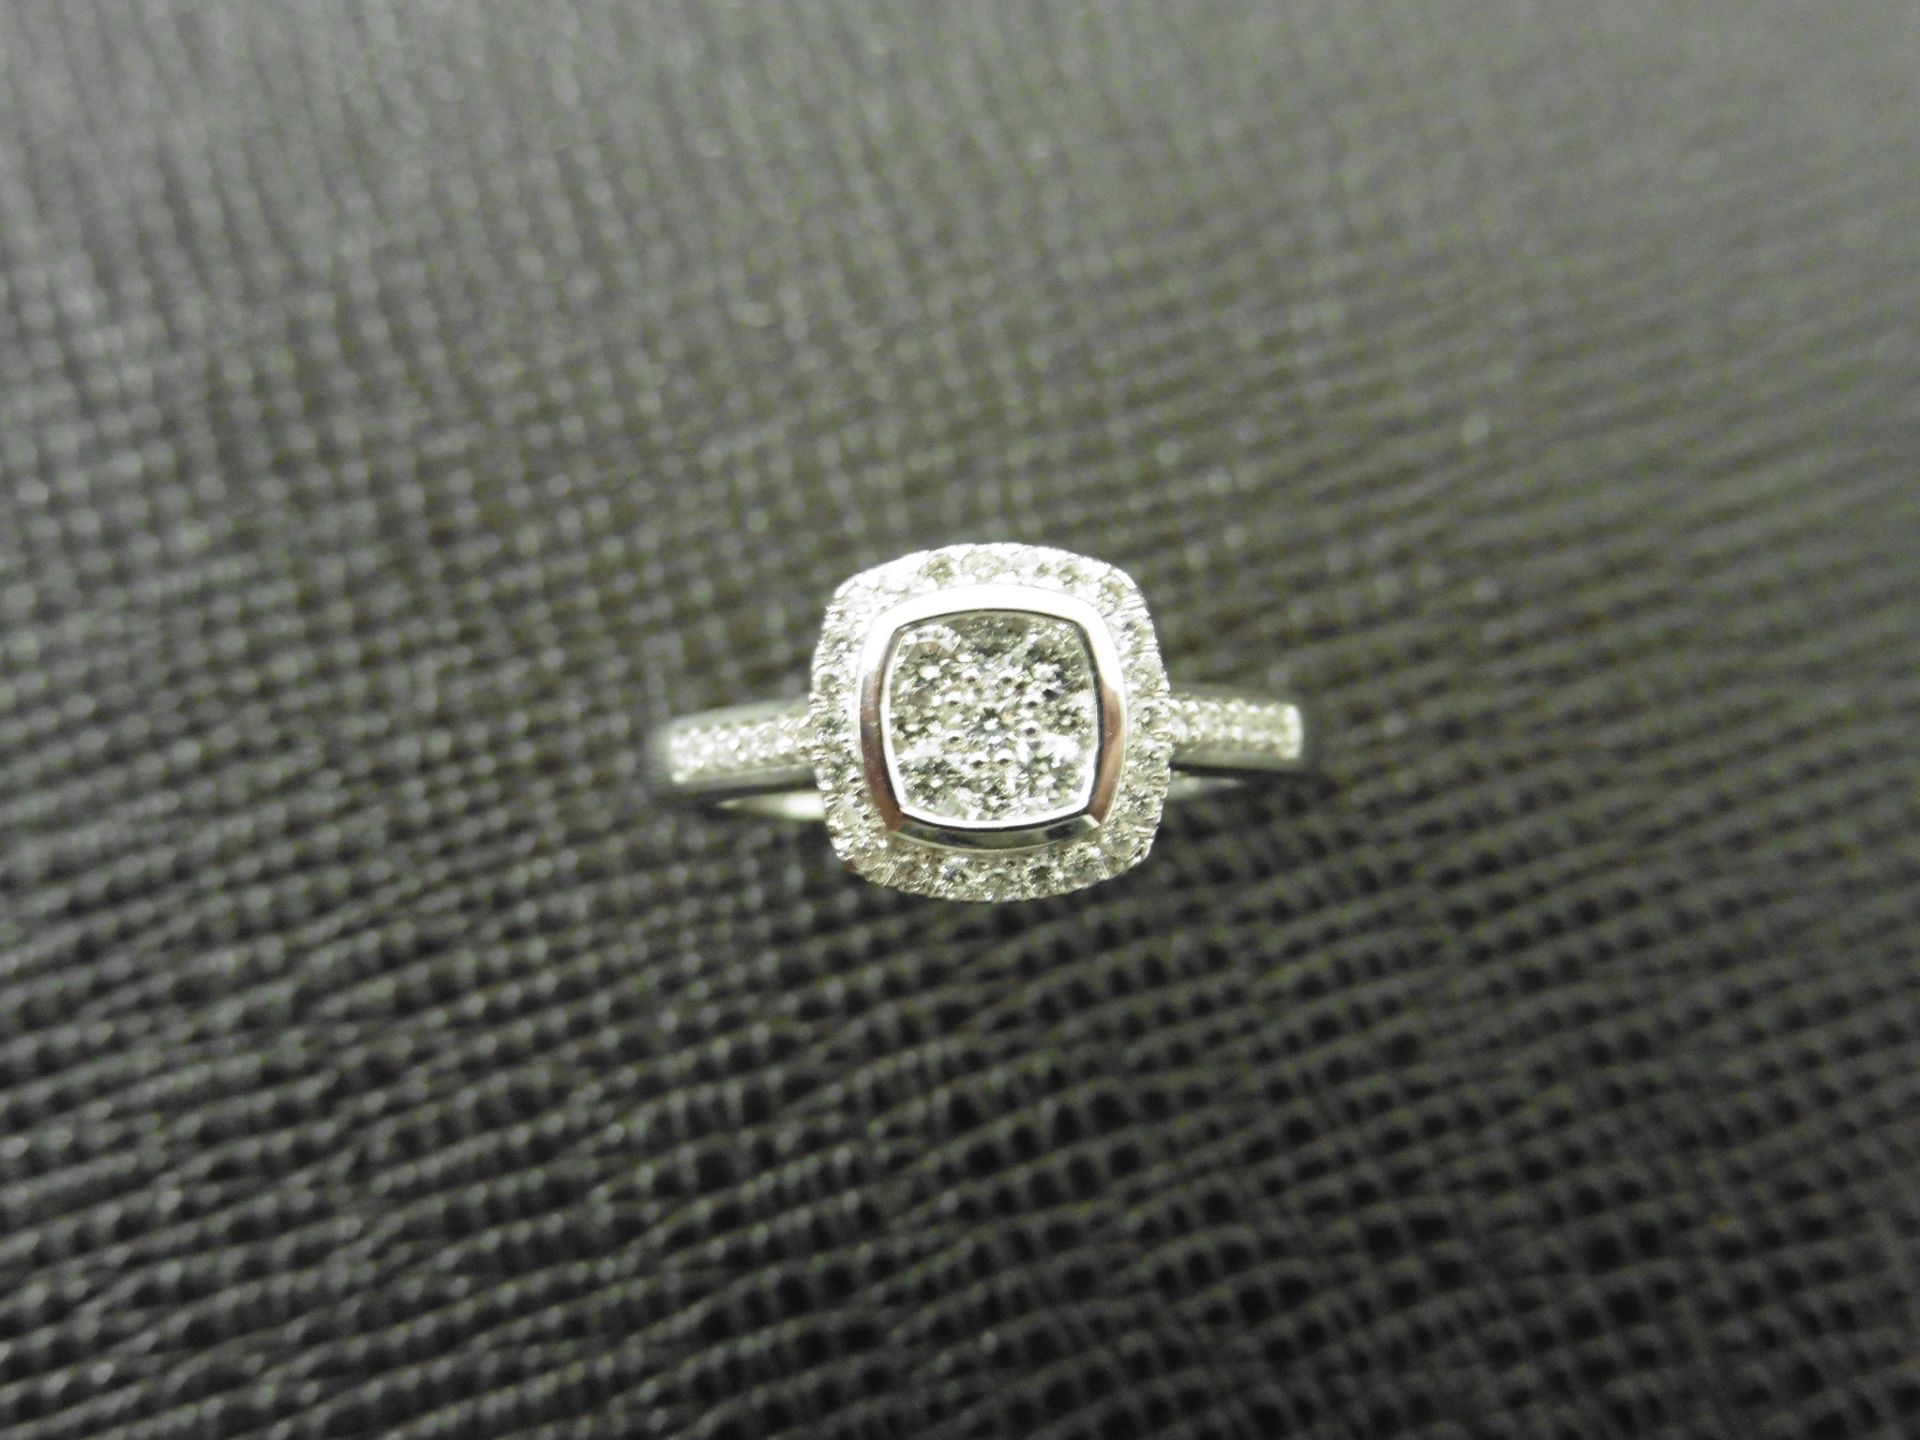 0.33ct diamond set solitaire style ring. Cushion cut setting with small round cut diamonds, H colour